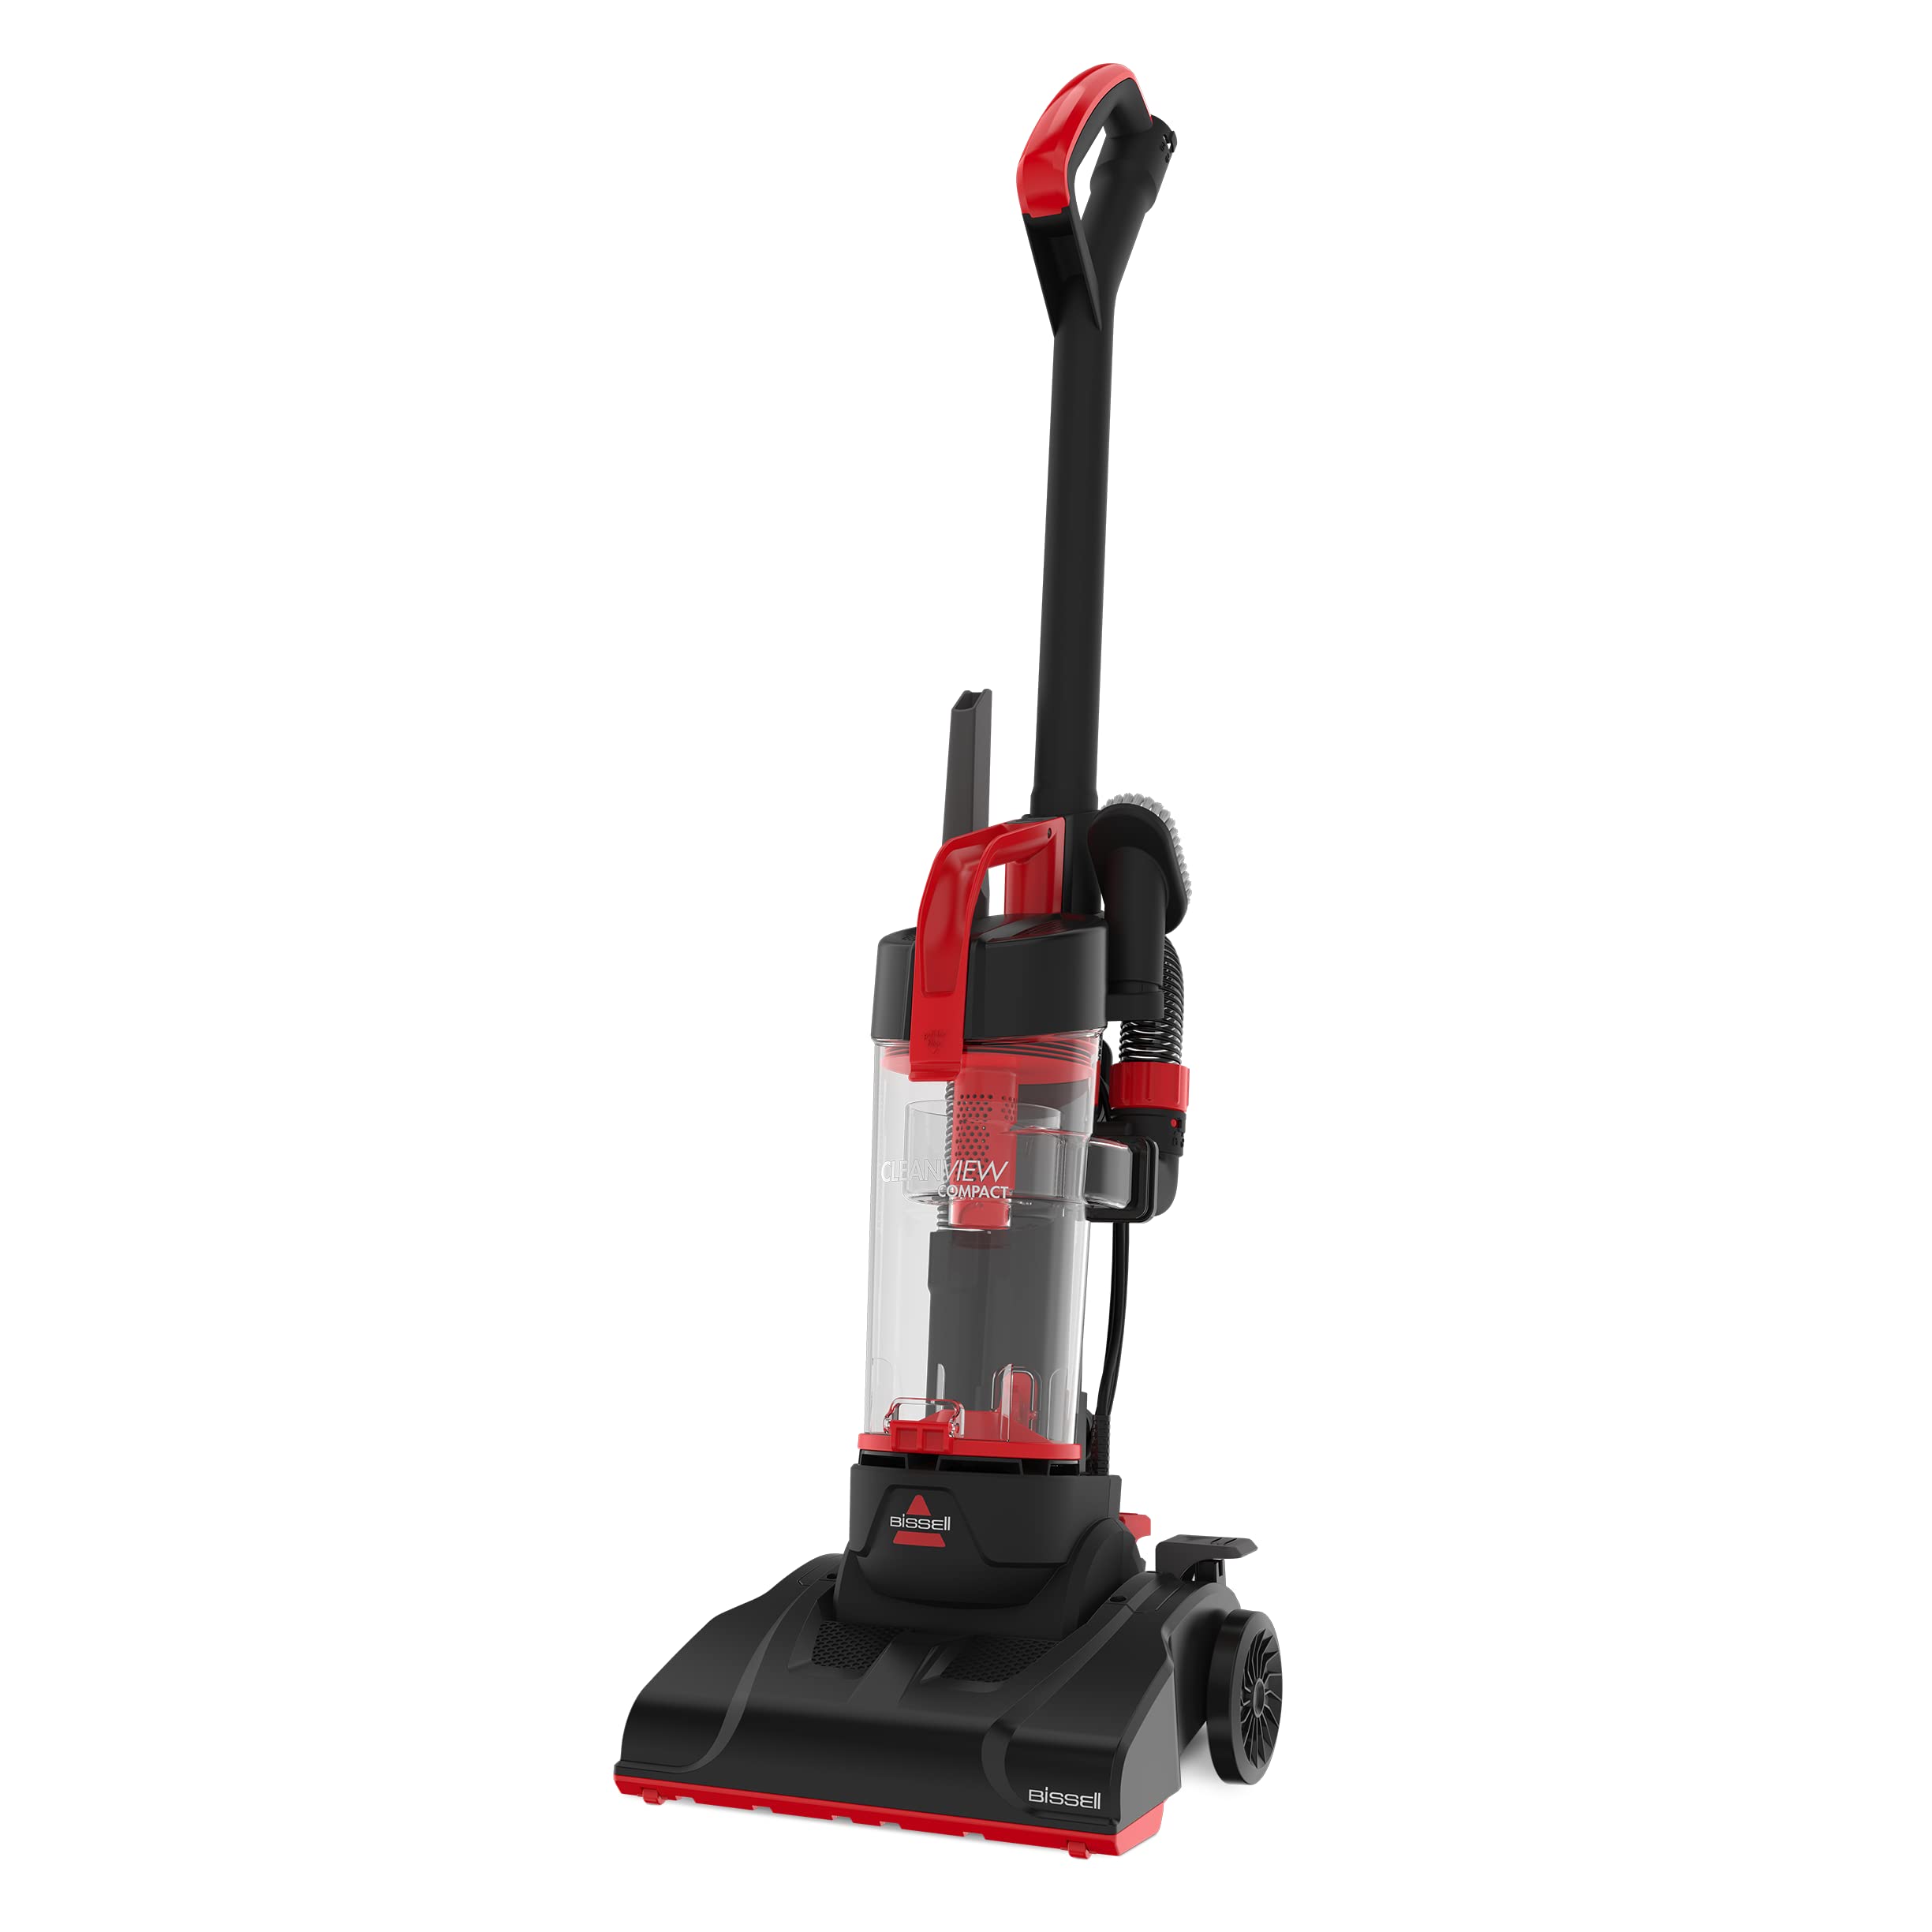 Bissell CleanView Compact Turbo Upright Vacuum